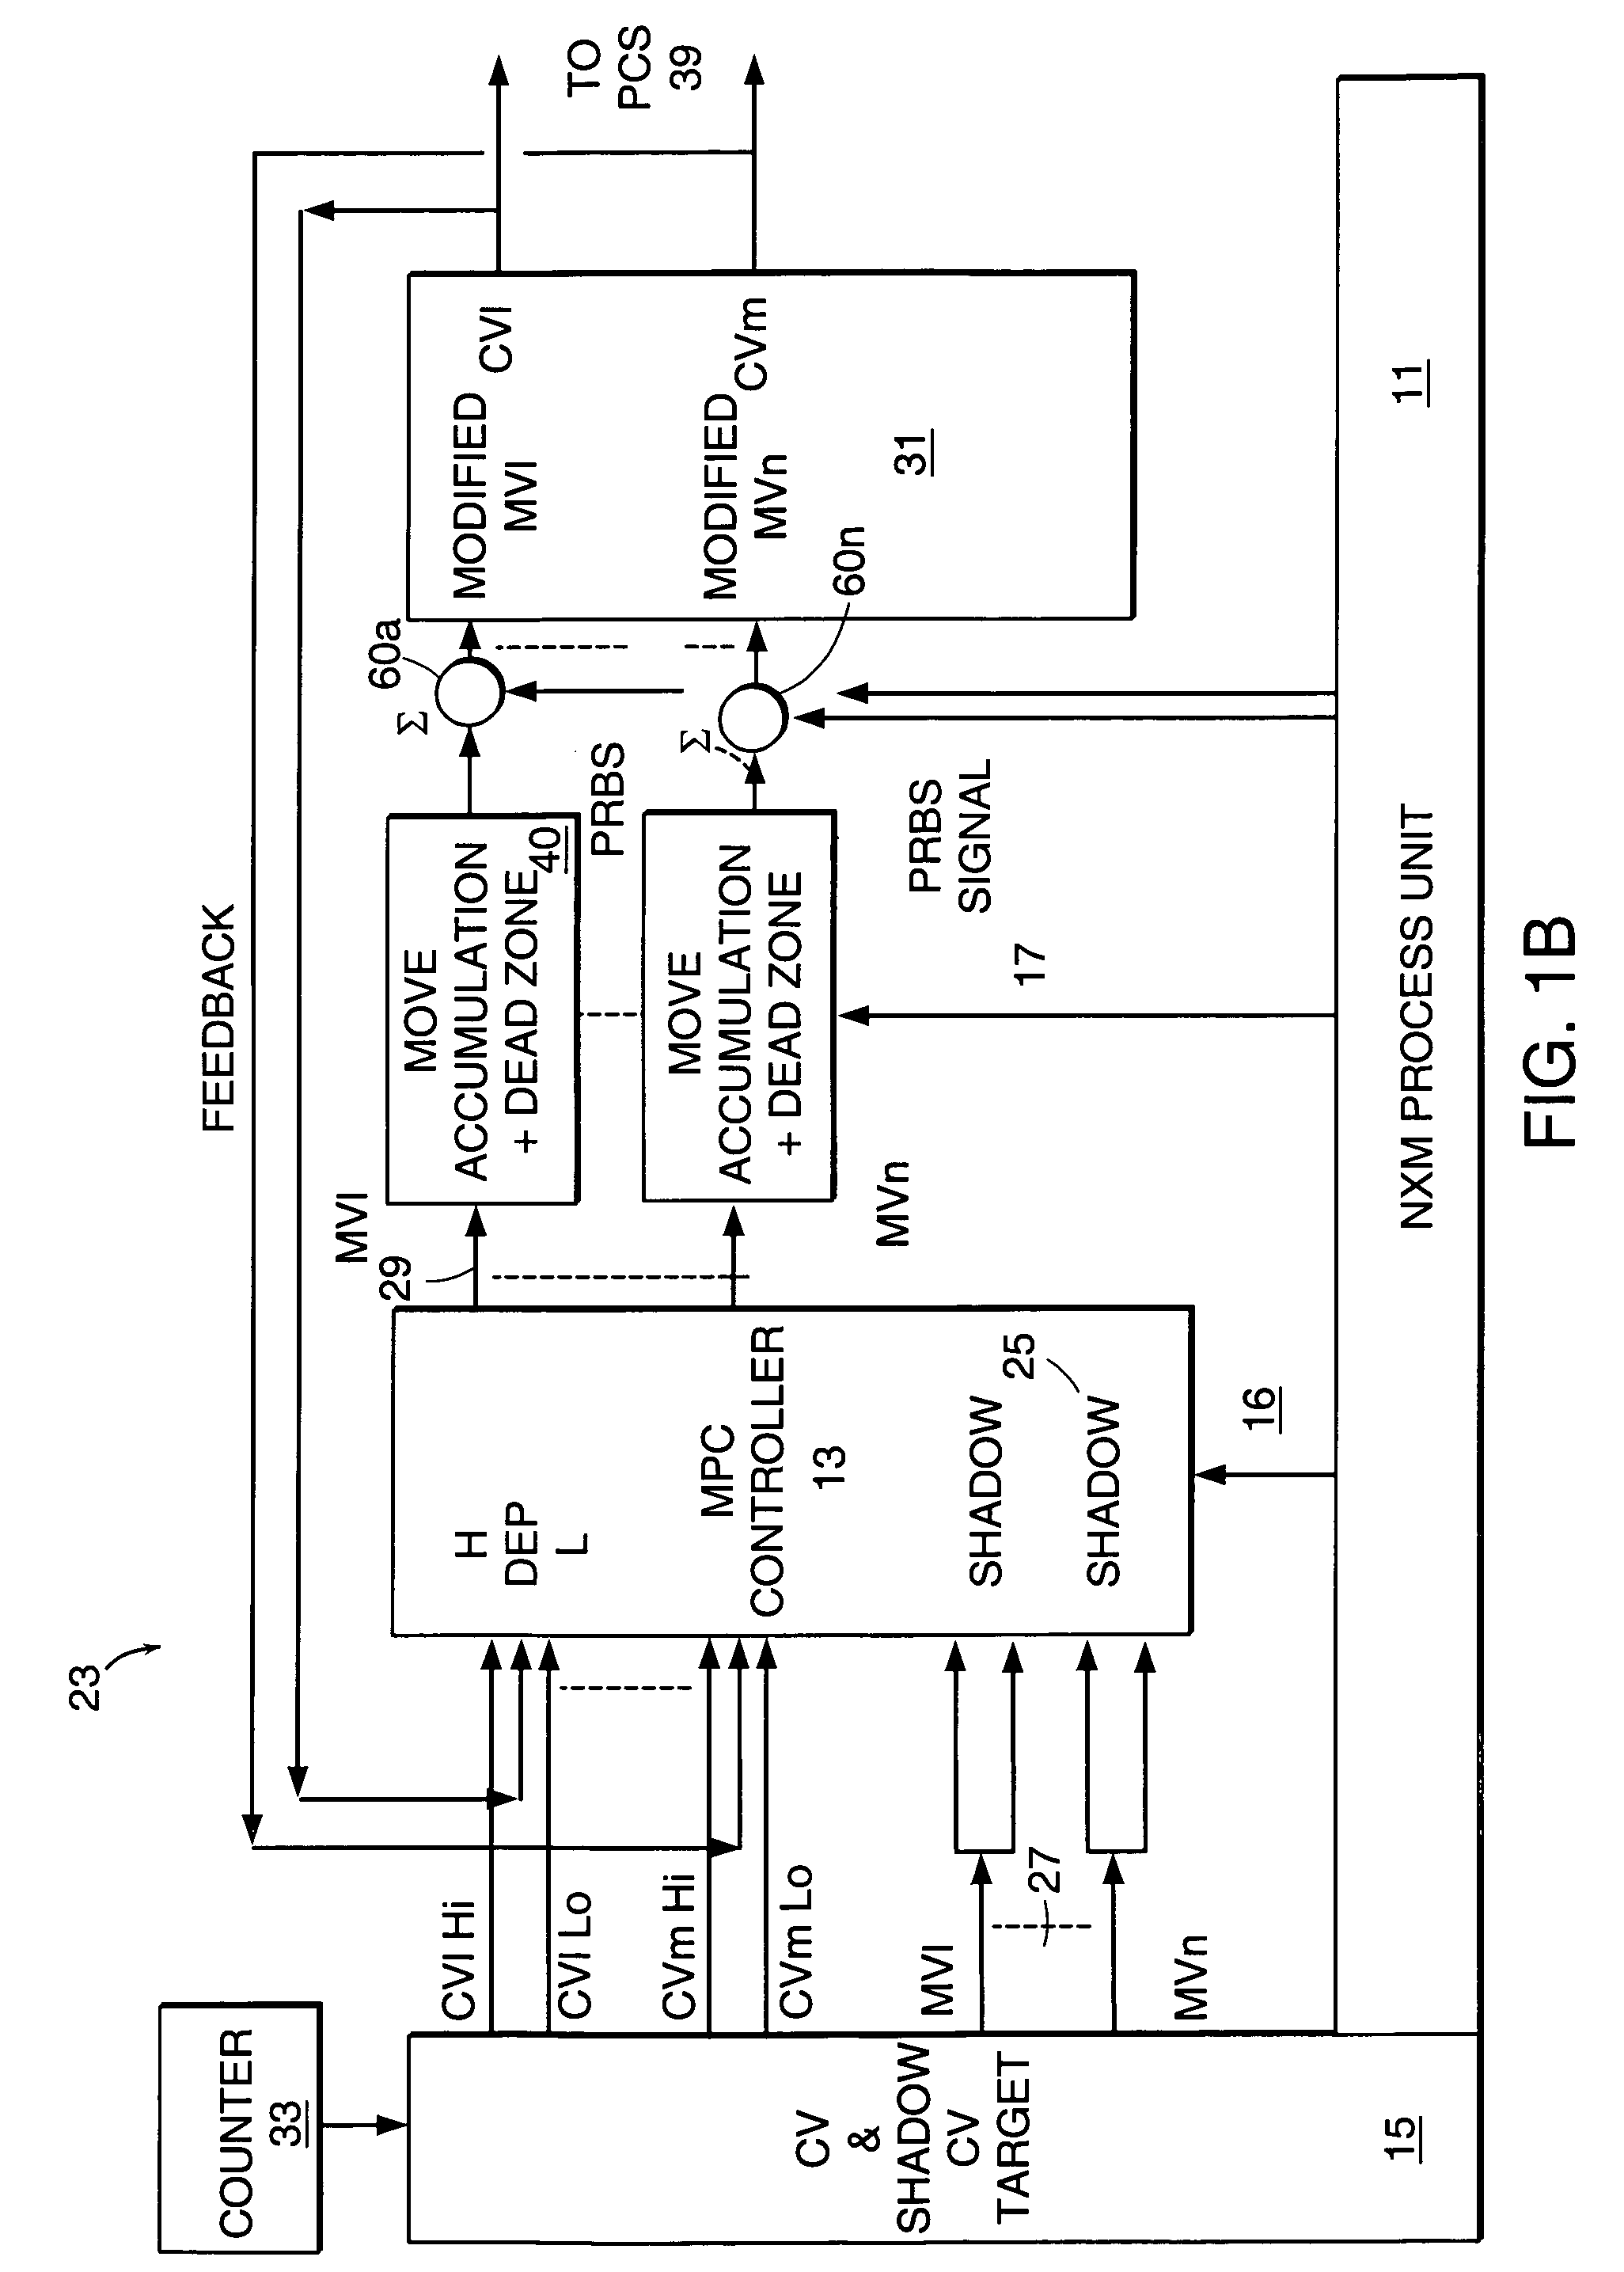 Automated closed loop step testing of process units